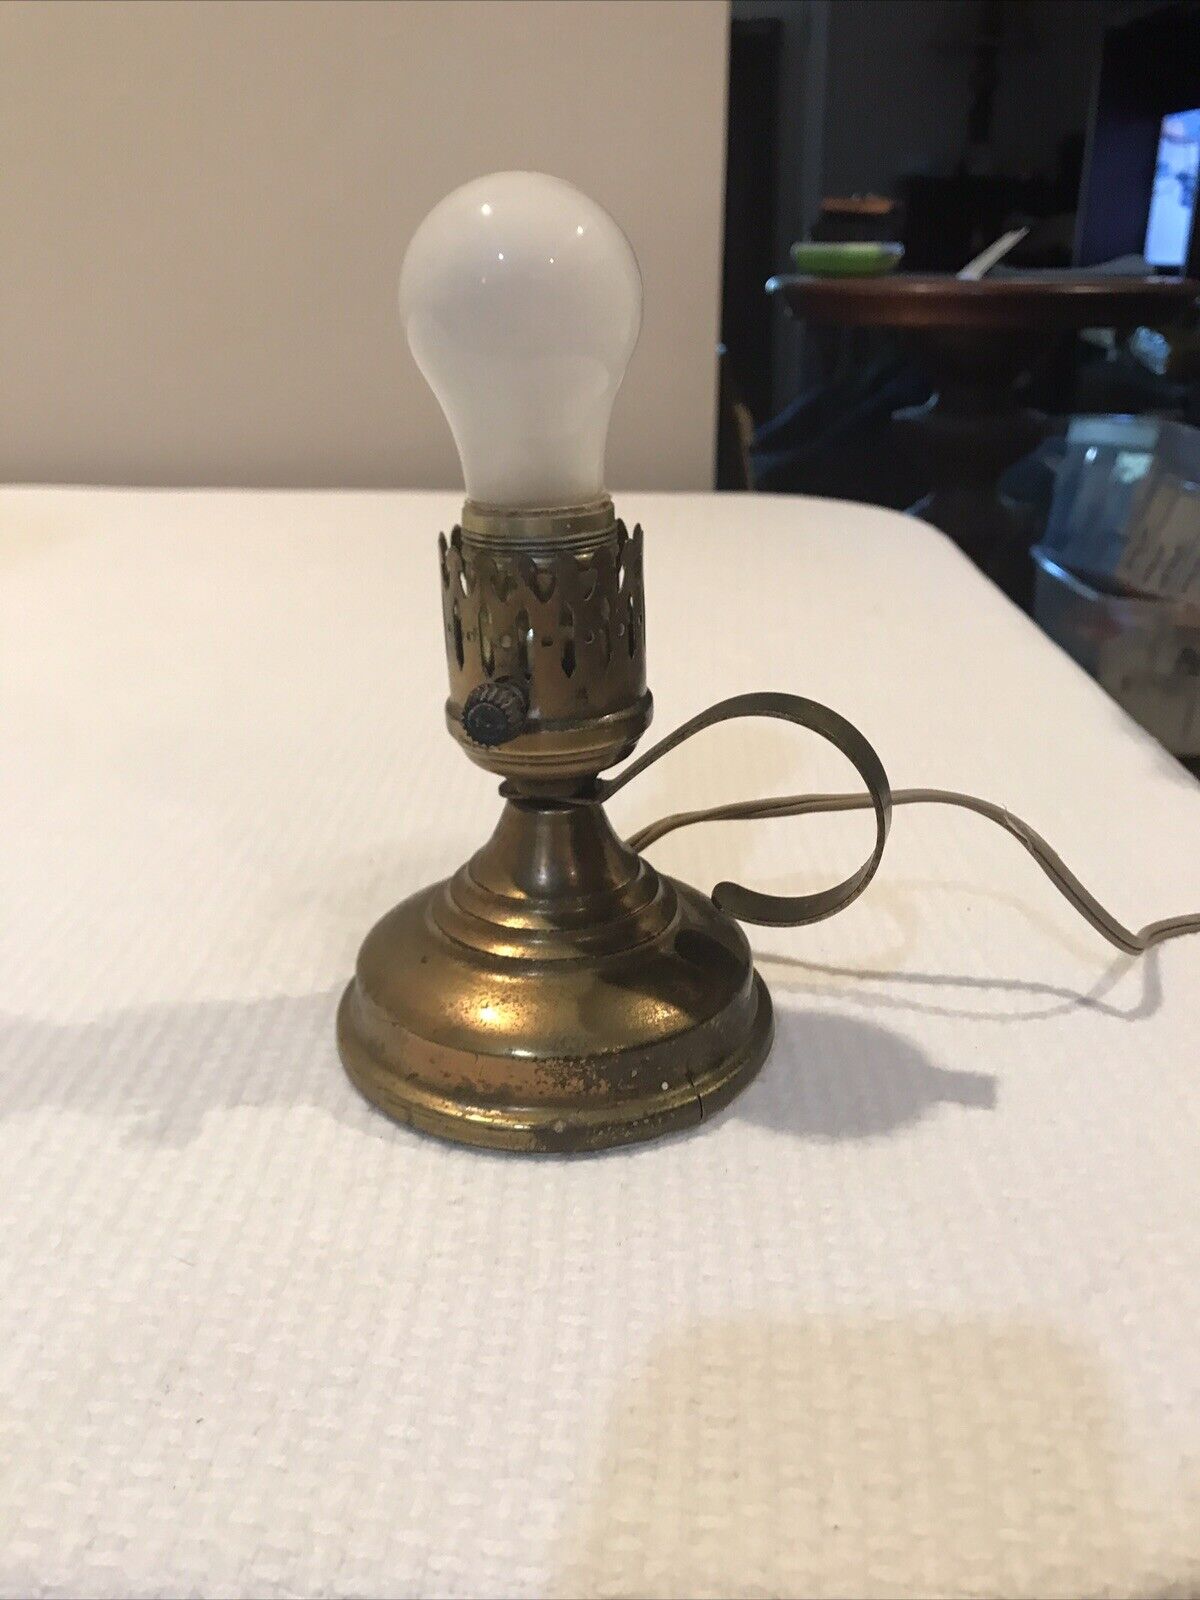 Small Portable Brass Lamp, Working W Handle - 5” Tall, Base 4” Across, No Globe